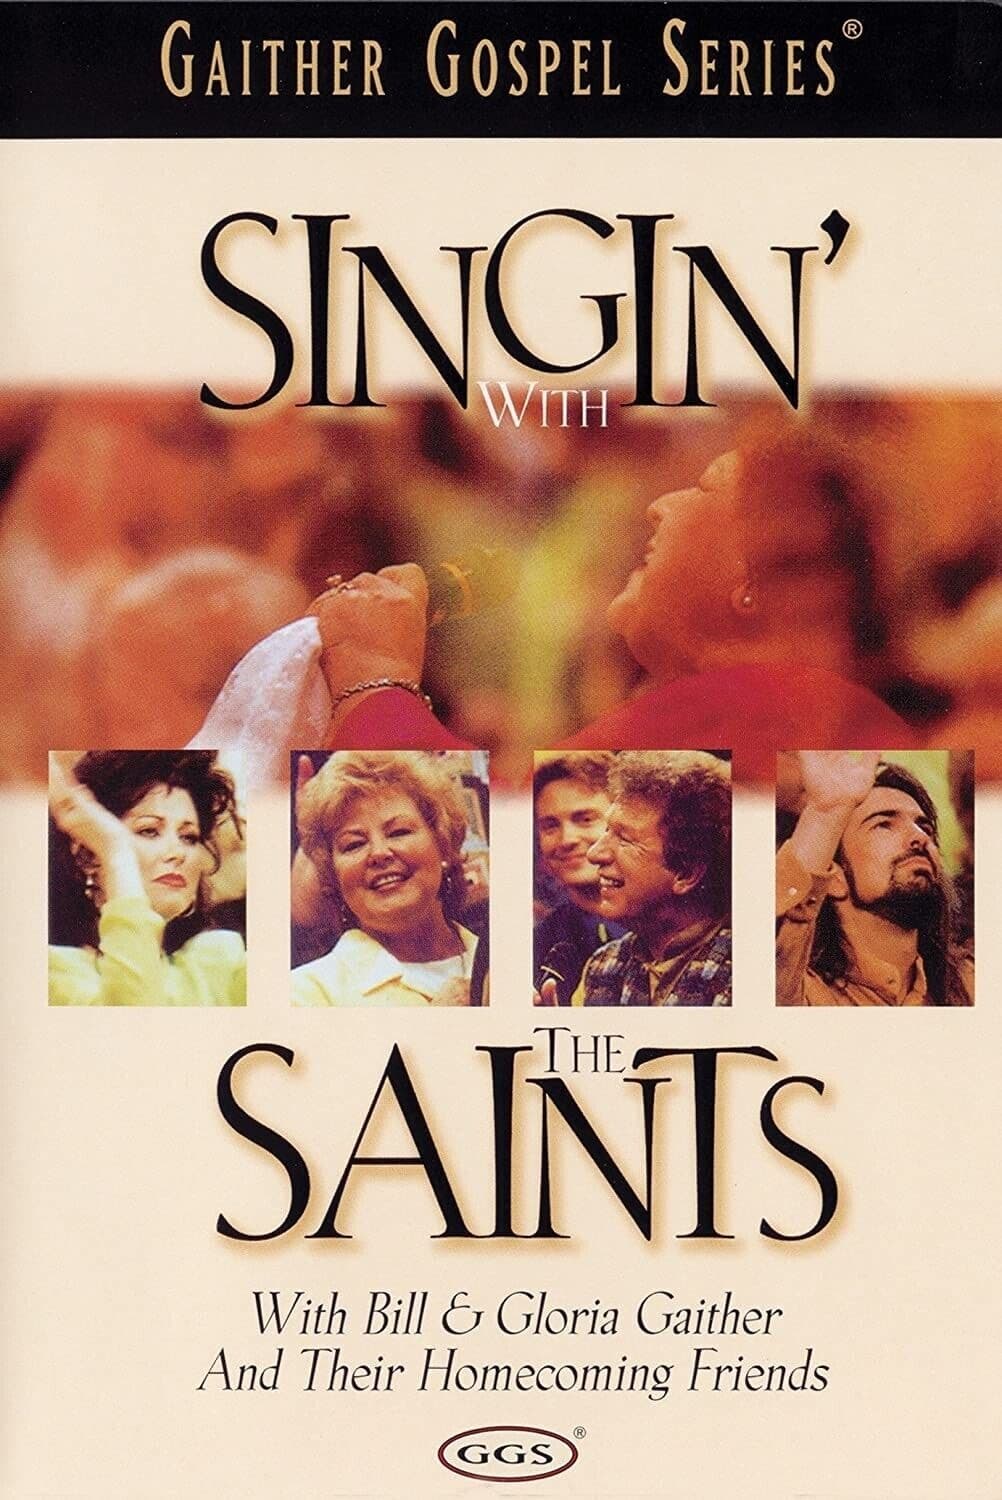 Singin' with the Saints